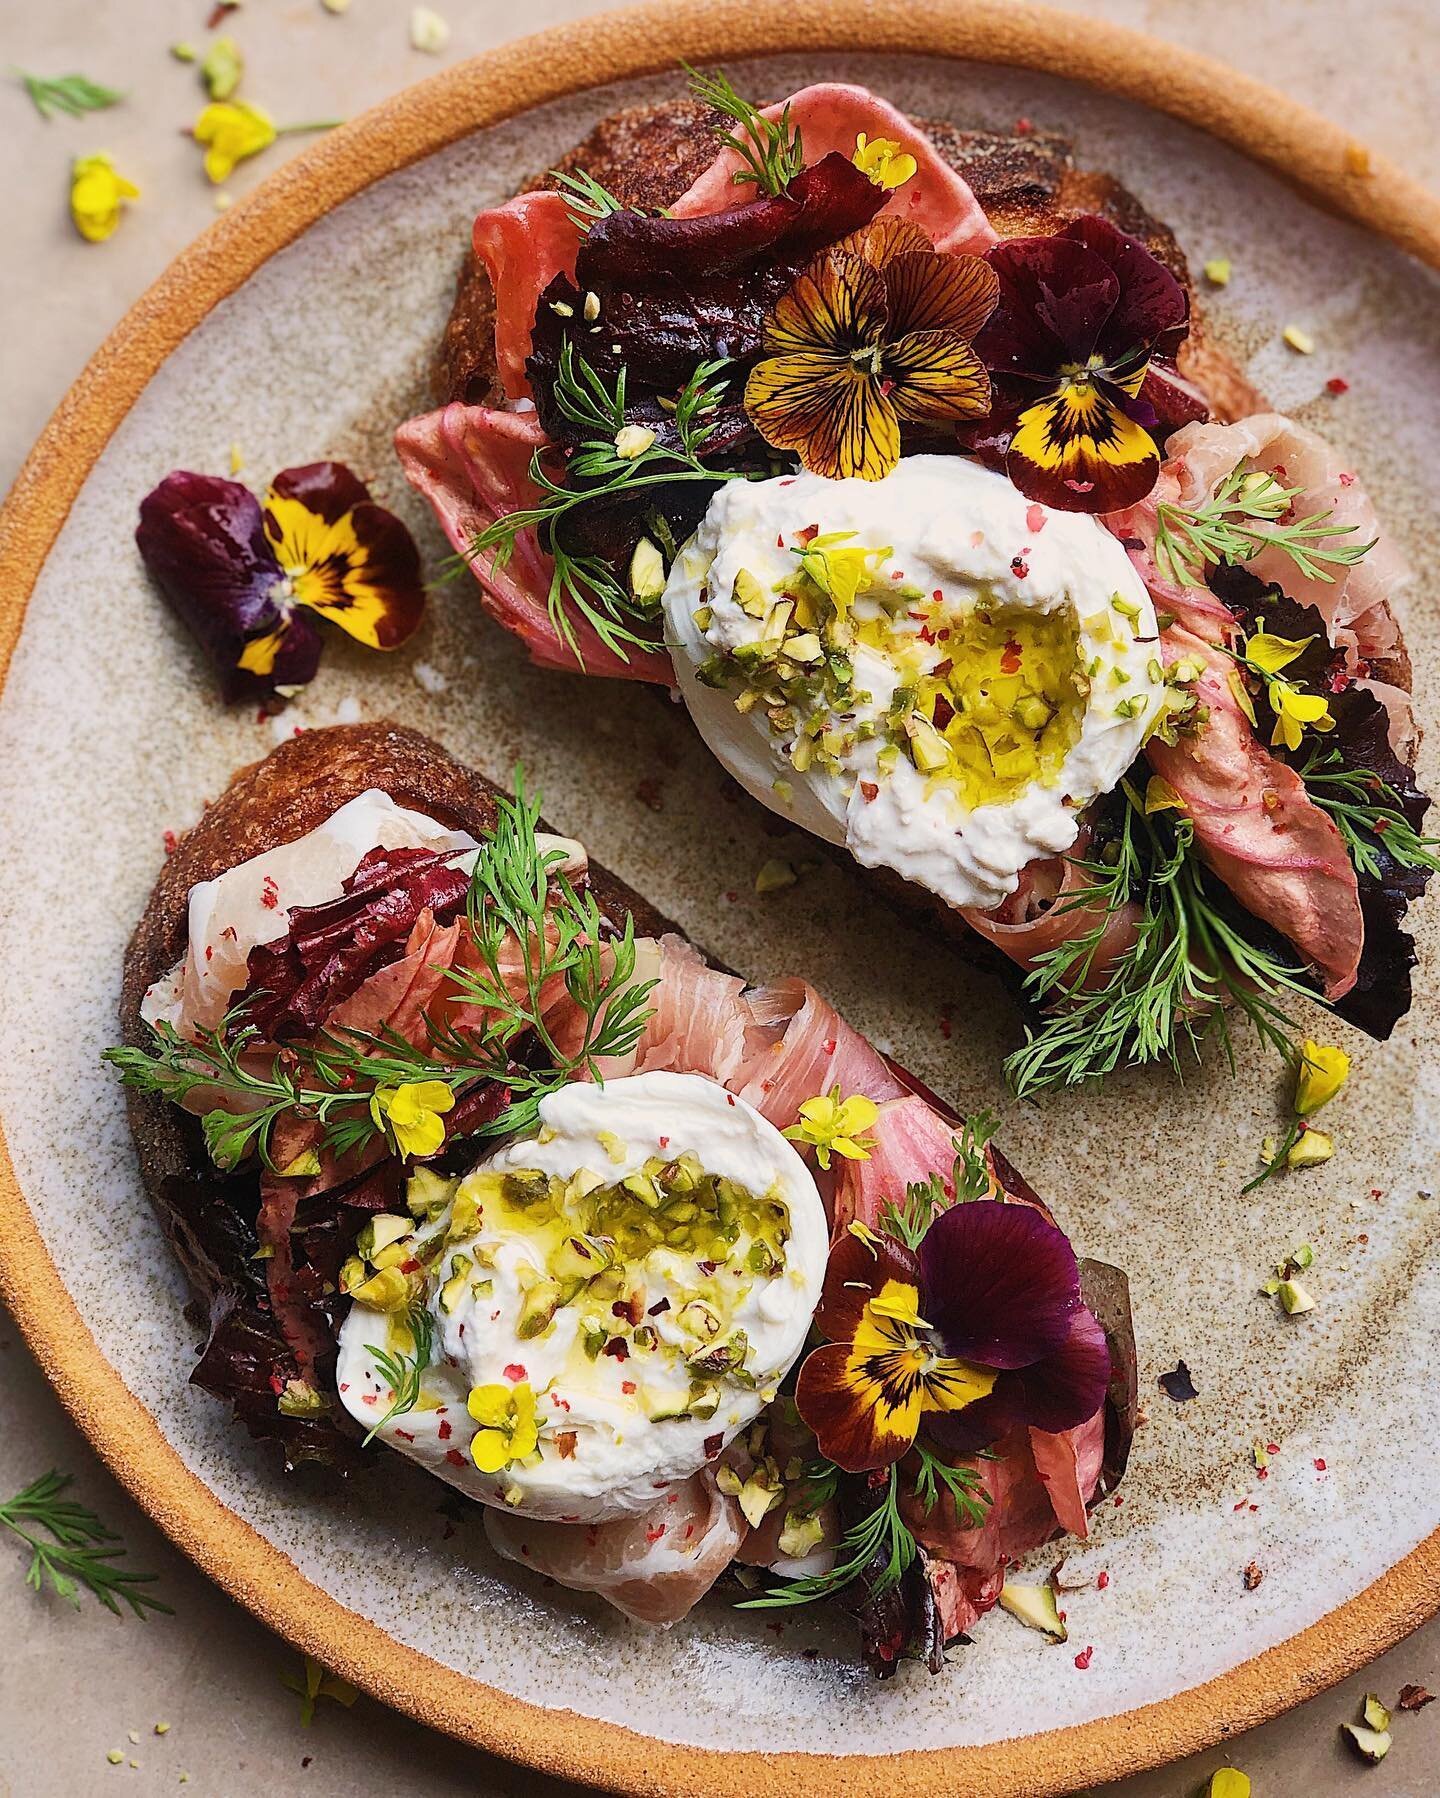 Salad toasts! (Kind of.) These are sourdough pan-fried in olive oil with just a little Greek yogurt to act as glue, and then topped with prosciutto, beautiful radicchio leaves dressed in a fruity dressing, gooey burrata, dill, chopped pistachios, goo